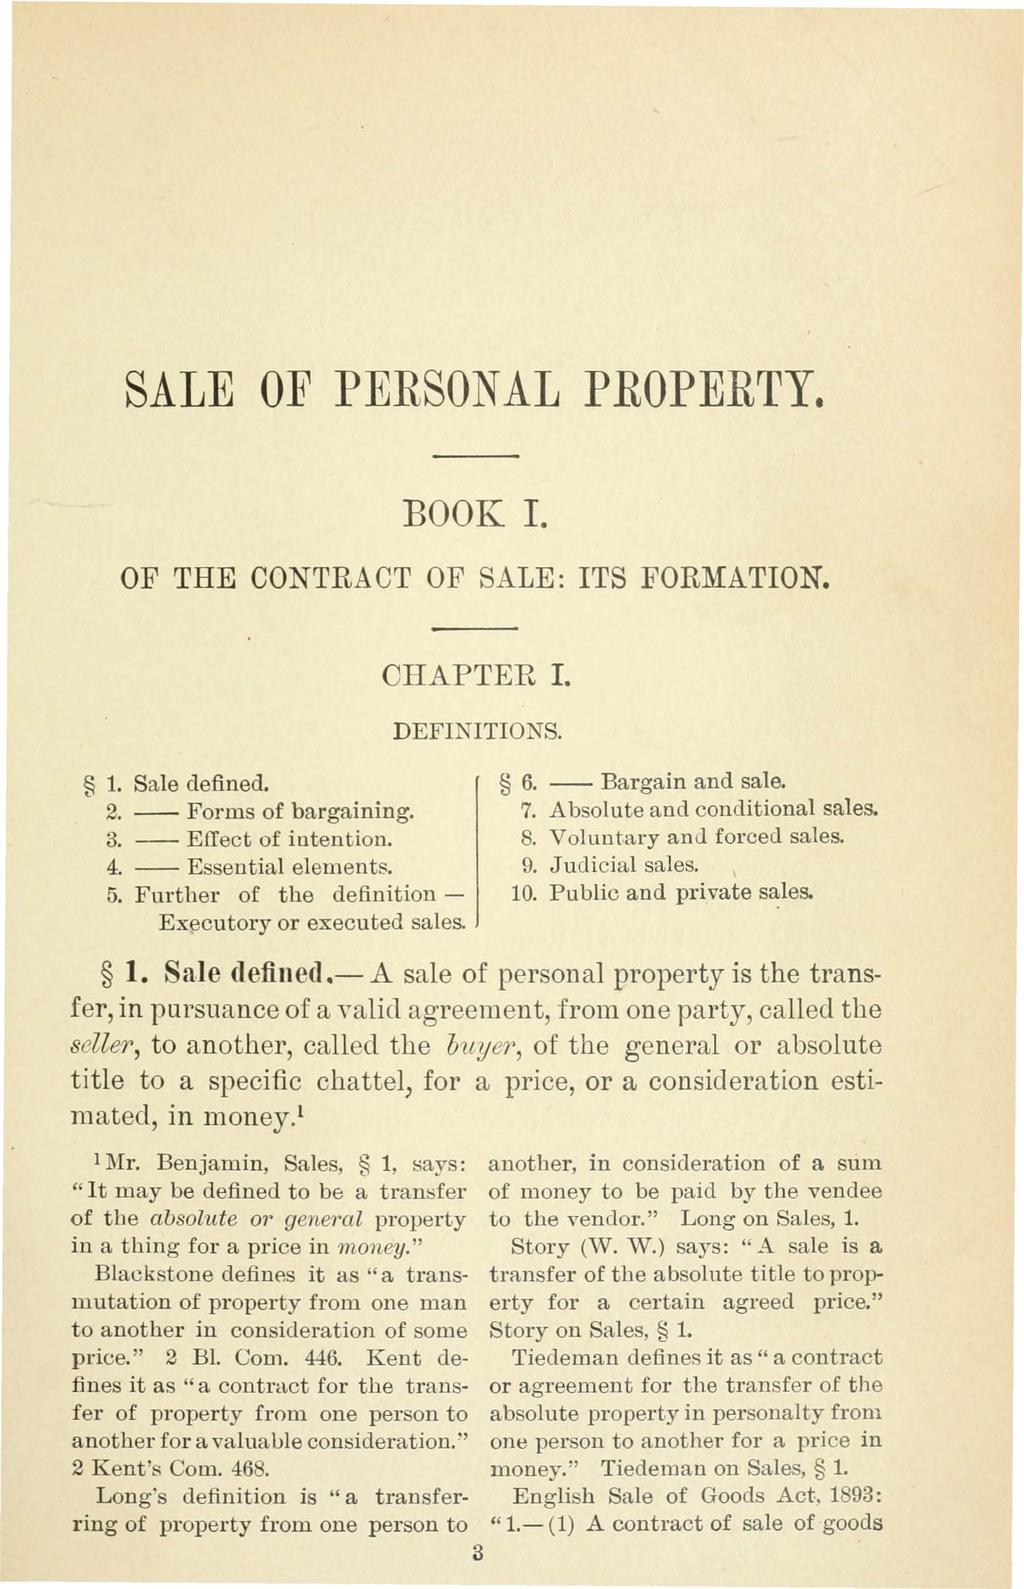 SALE OF PERSONAL PROPERTY. BOOK I. OF THE CONTRACT OF SALE: ITS FORMATION. CHAPTER I. DEFINITIONS. 1. Sale defined. 2. -- Forms of bargaining. 3. -- Effect of intention. 4. -- Essential elements. 5.